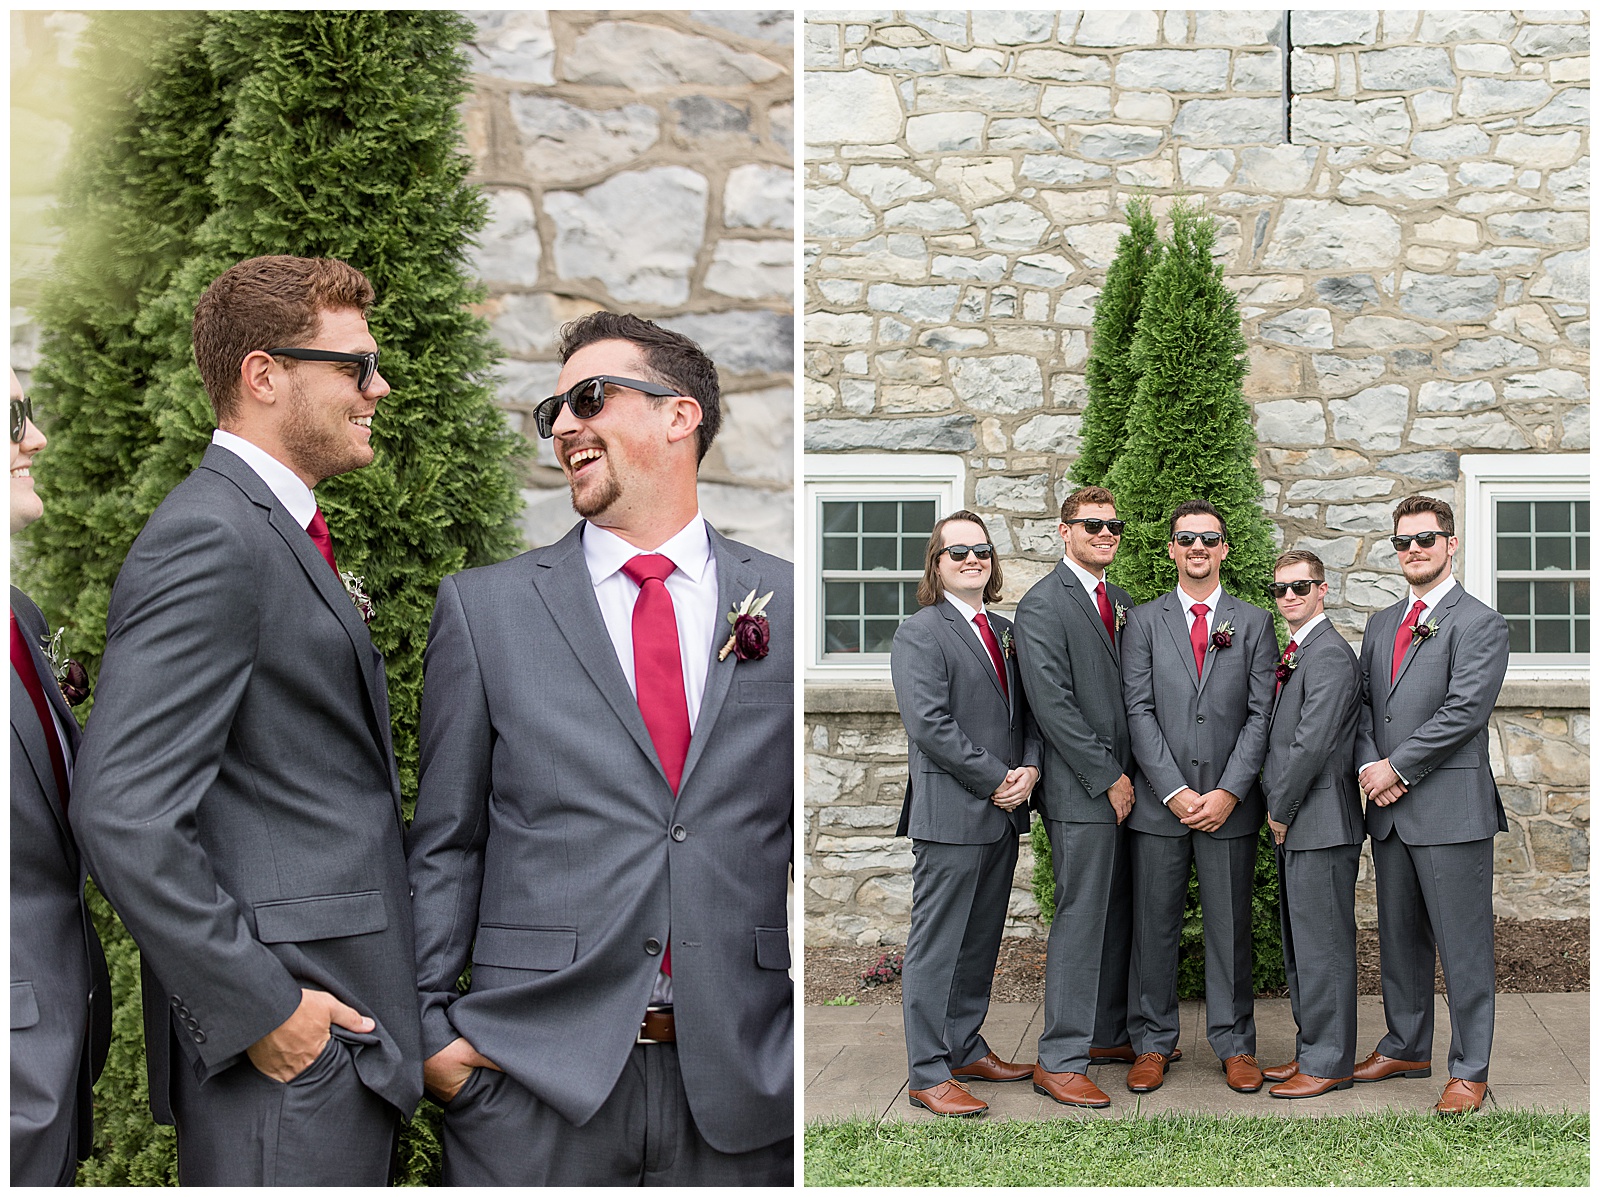 groom and his groomsmen all wearing black sunglasses and smiling by stone wall with shrubbery behind them